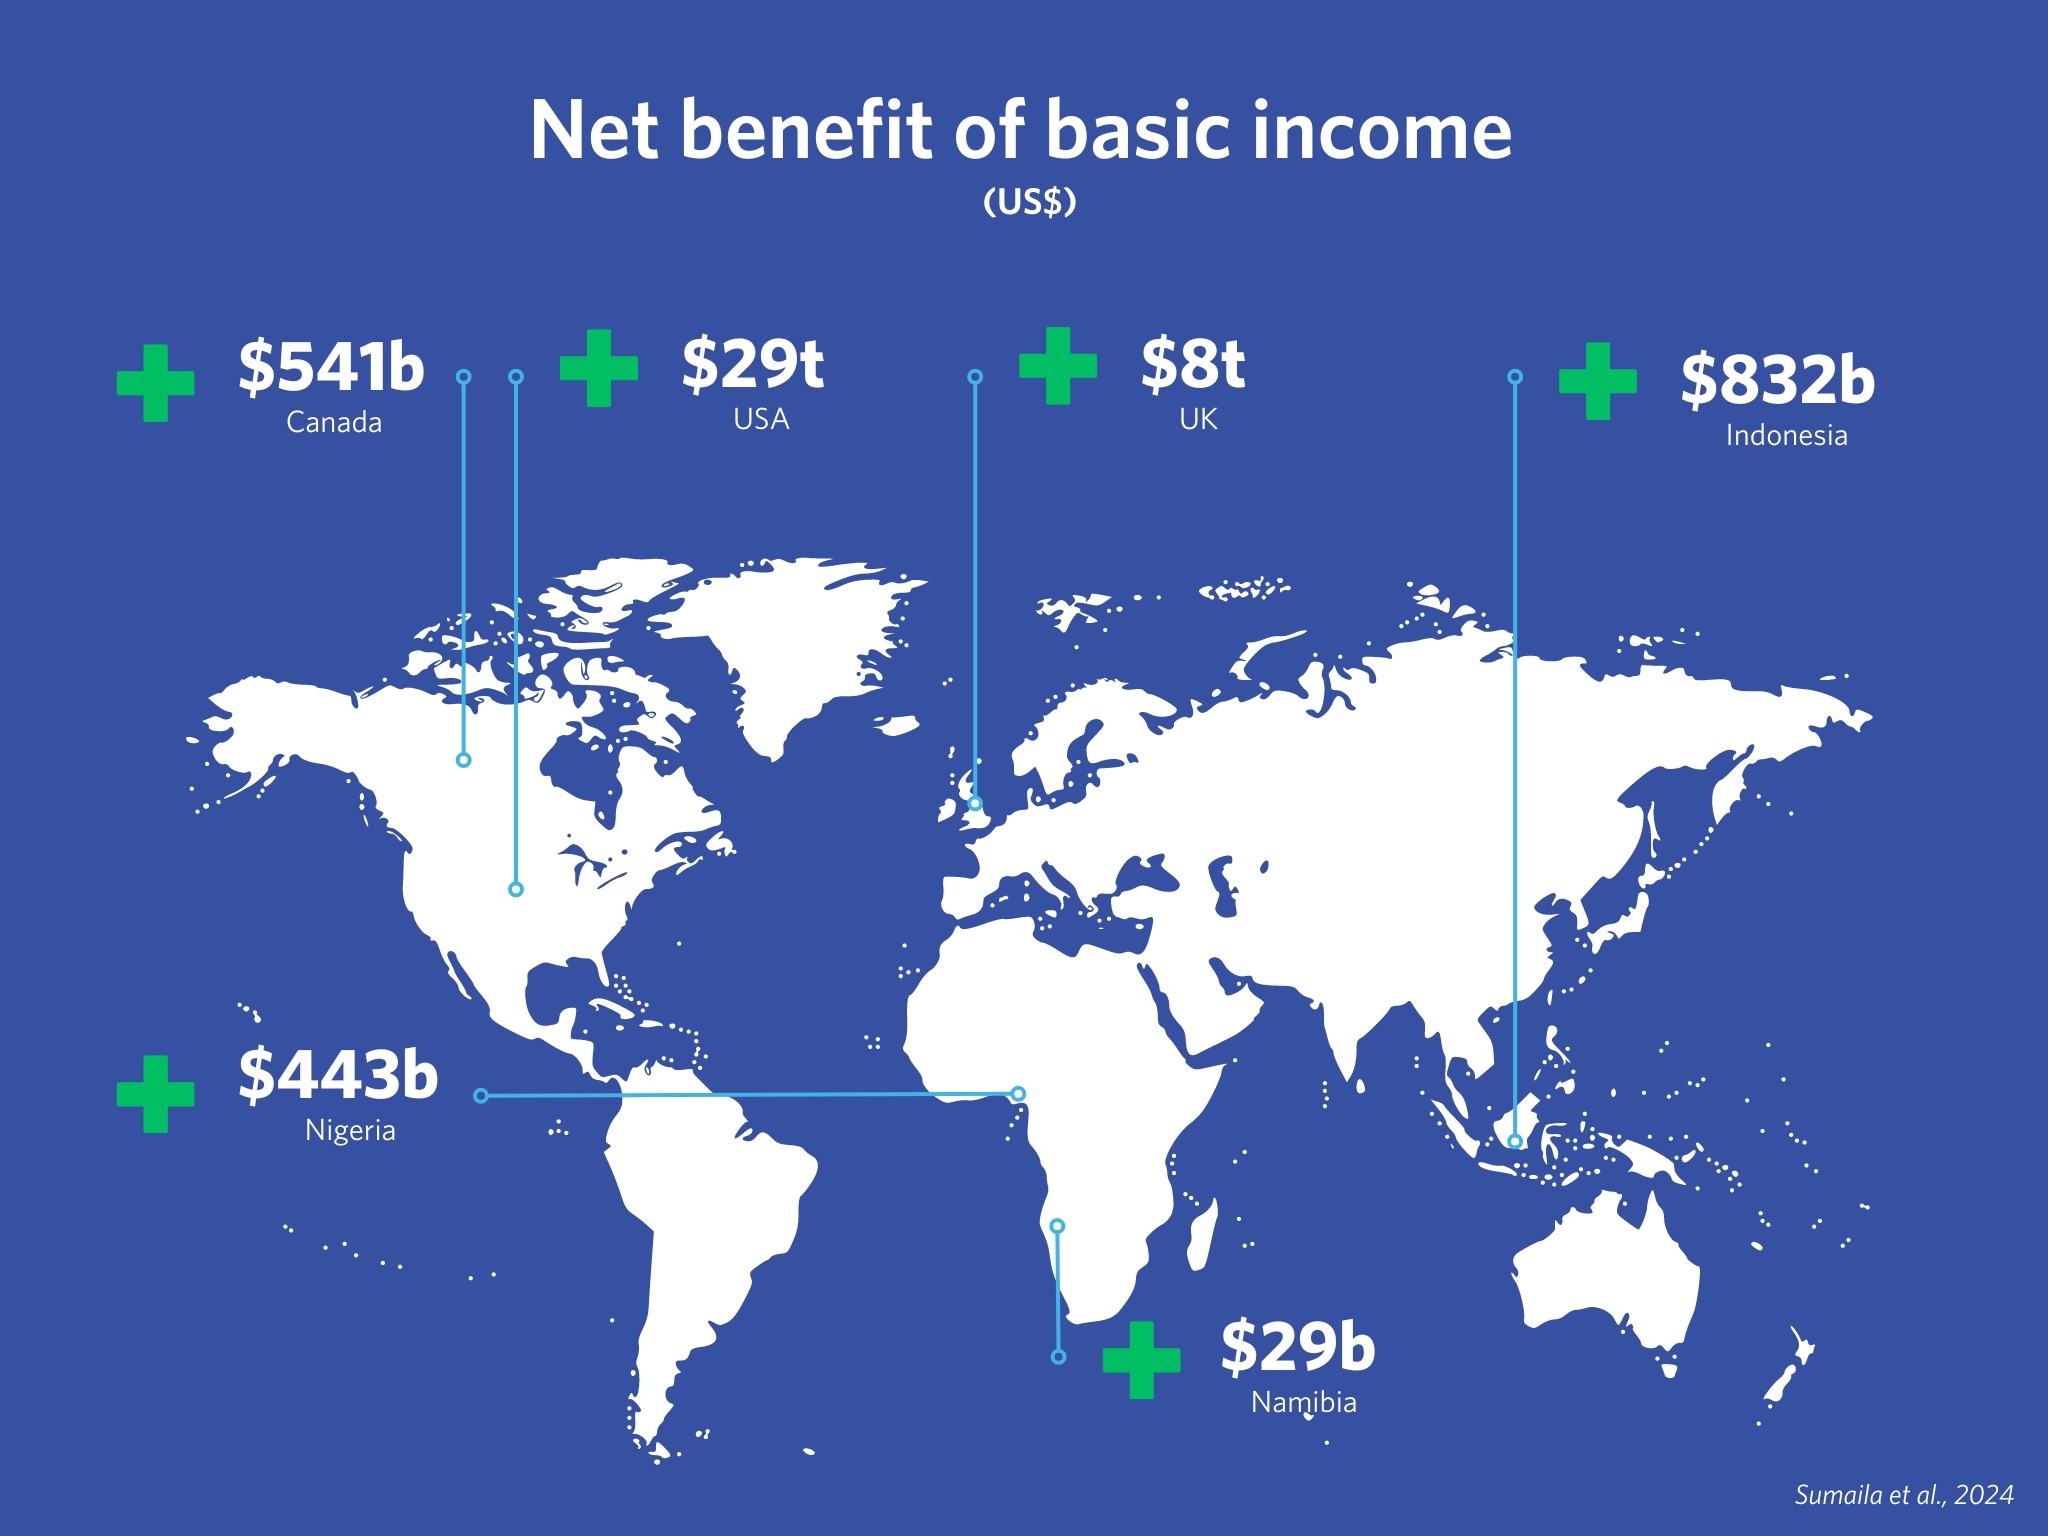 Net benefit of Universal Basic Income in USD